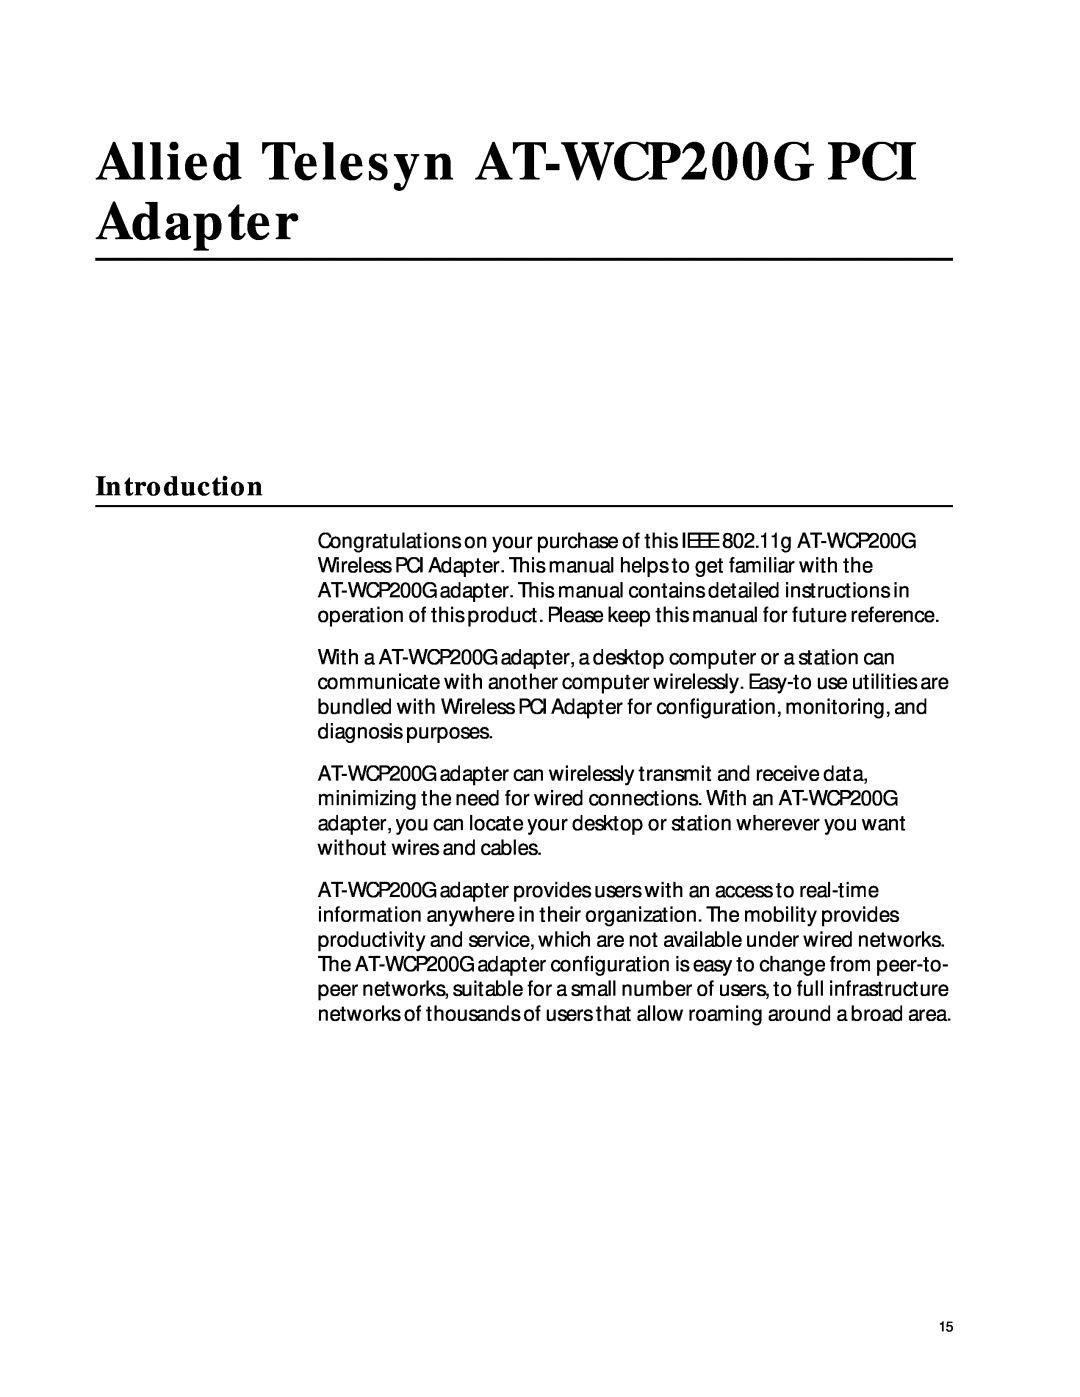 Allied Telesis manual Allied Telesyn AT-WCP200G PCI Adapter, Introduction 